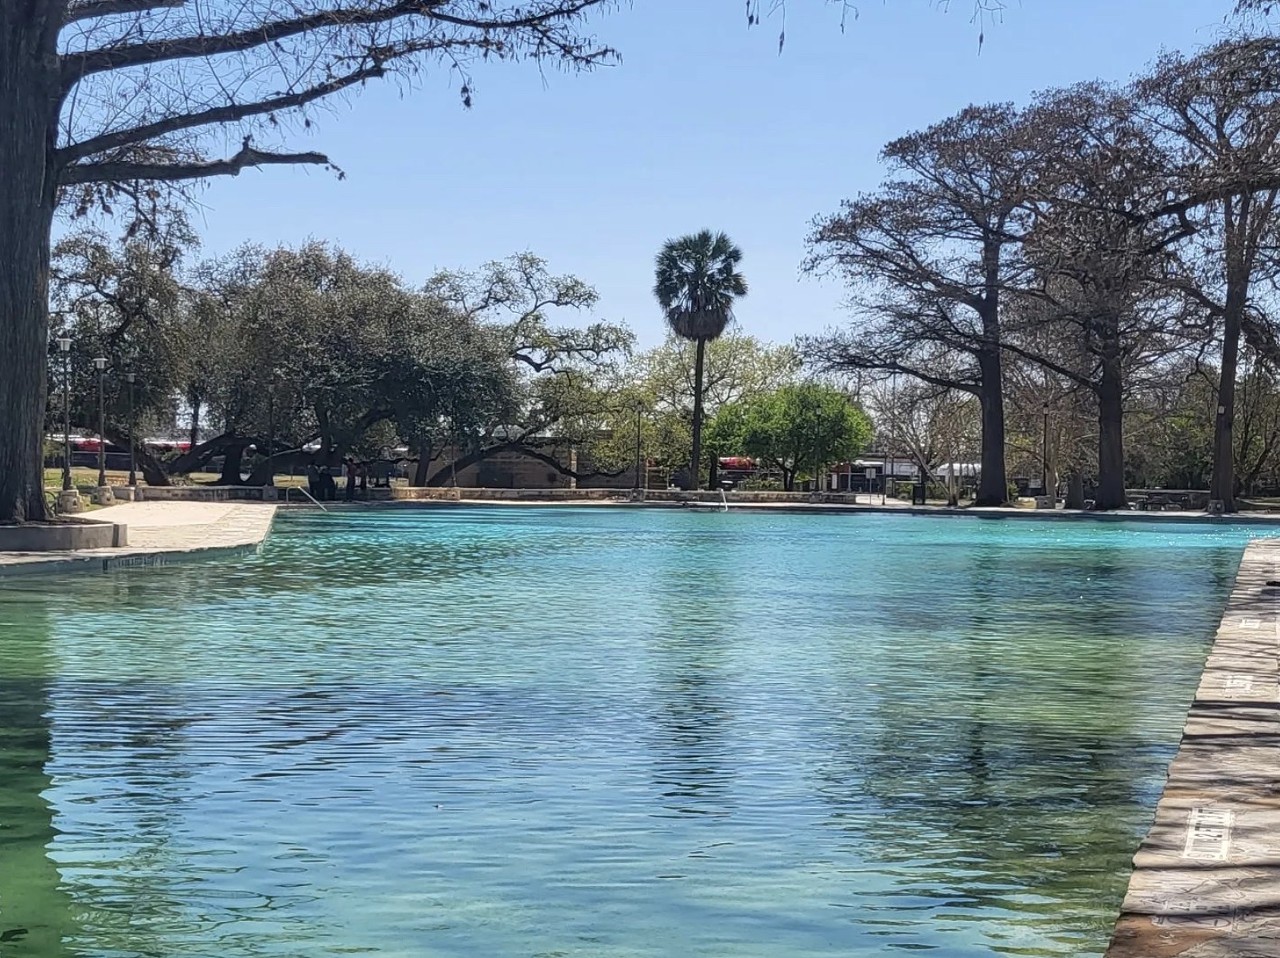 San Pedro Springs Park Pool
2200 N. Flores St., (210) 732-5992, sanantonio.gov
Looking to spend a day in the poolside shade at a history-filled park smack-dab in the middle of San Antonio? Look no further than San Pedro Springs Park Pool. The 46-acre park dates back to the eighteenth century, making it the second-oldest public park in the country, behind only the Boston Commons. The spring-fed pool was built as a part of the park’s overall renovation in 1915-20, replacing what was once a lake bed.